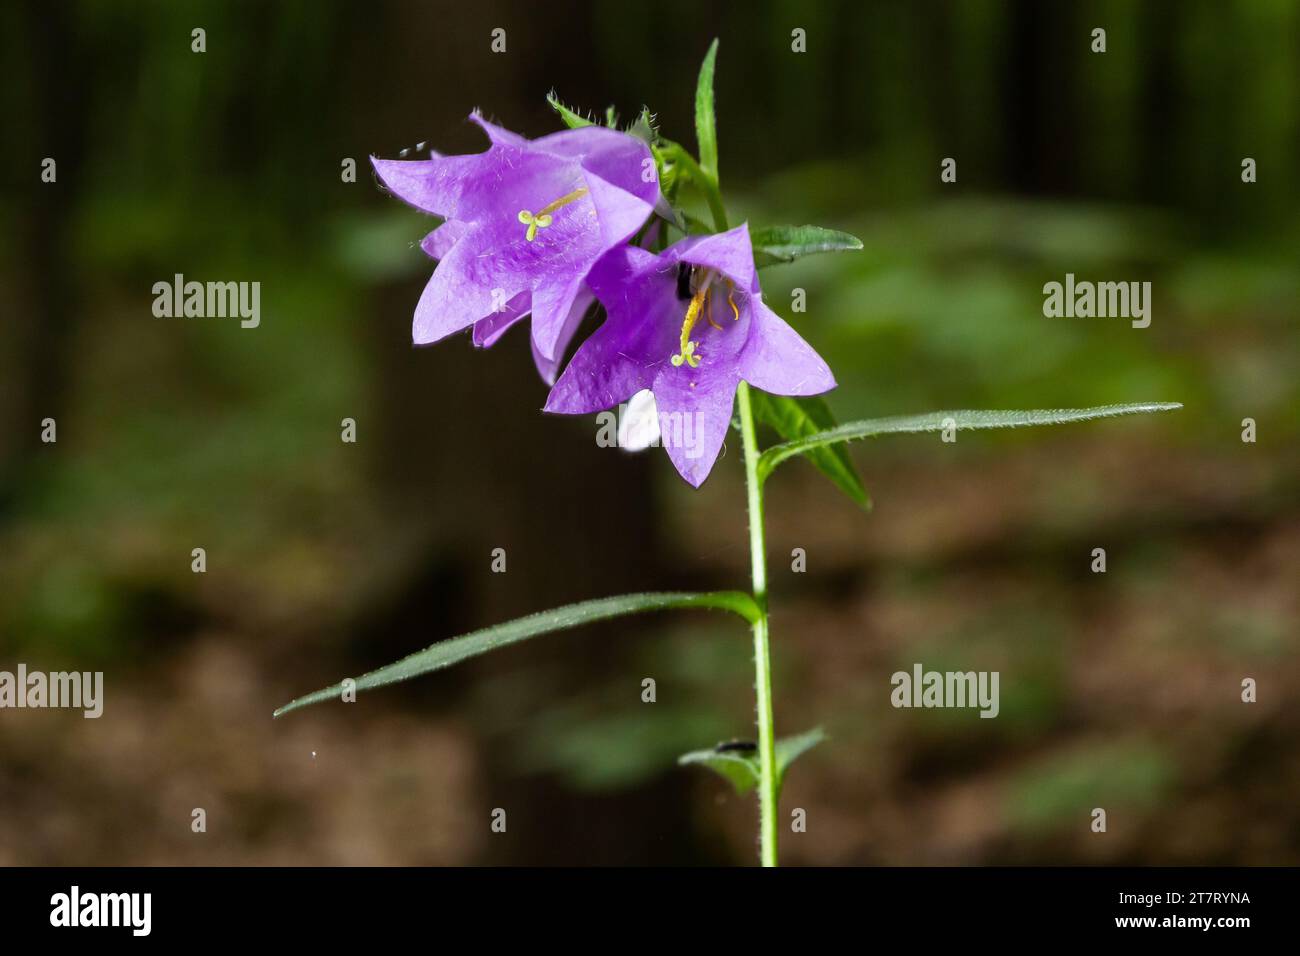 Close-up of flowering nettle-leaved bellflower on dark blurry natural background. Campanula trachelium. Beautiful detail of hairy violet bell shaped f Stock Photo